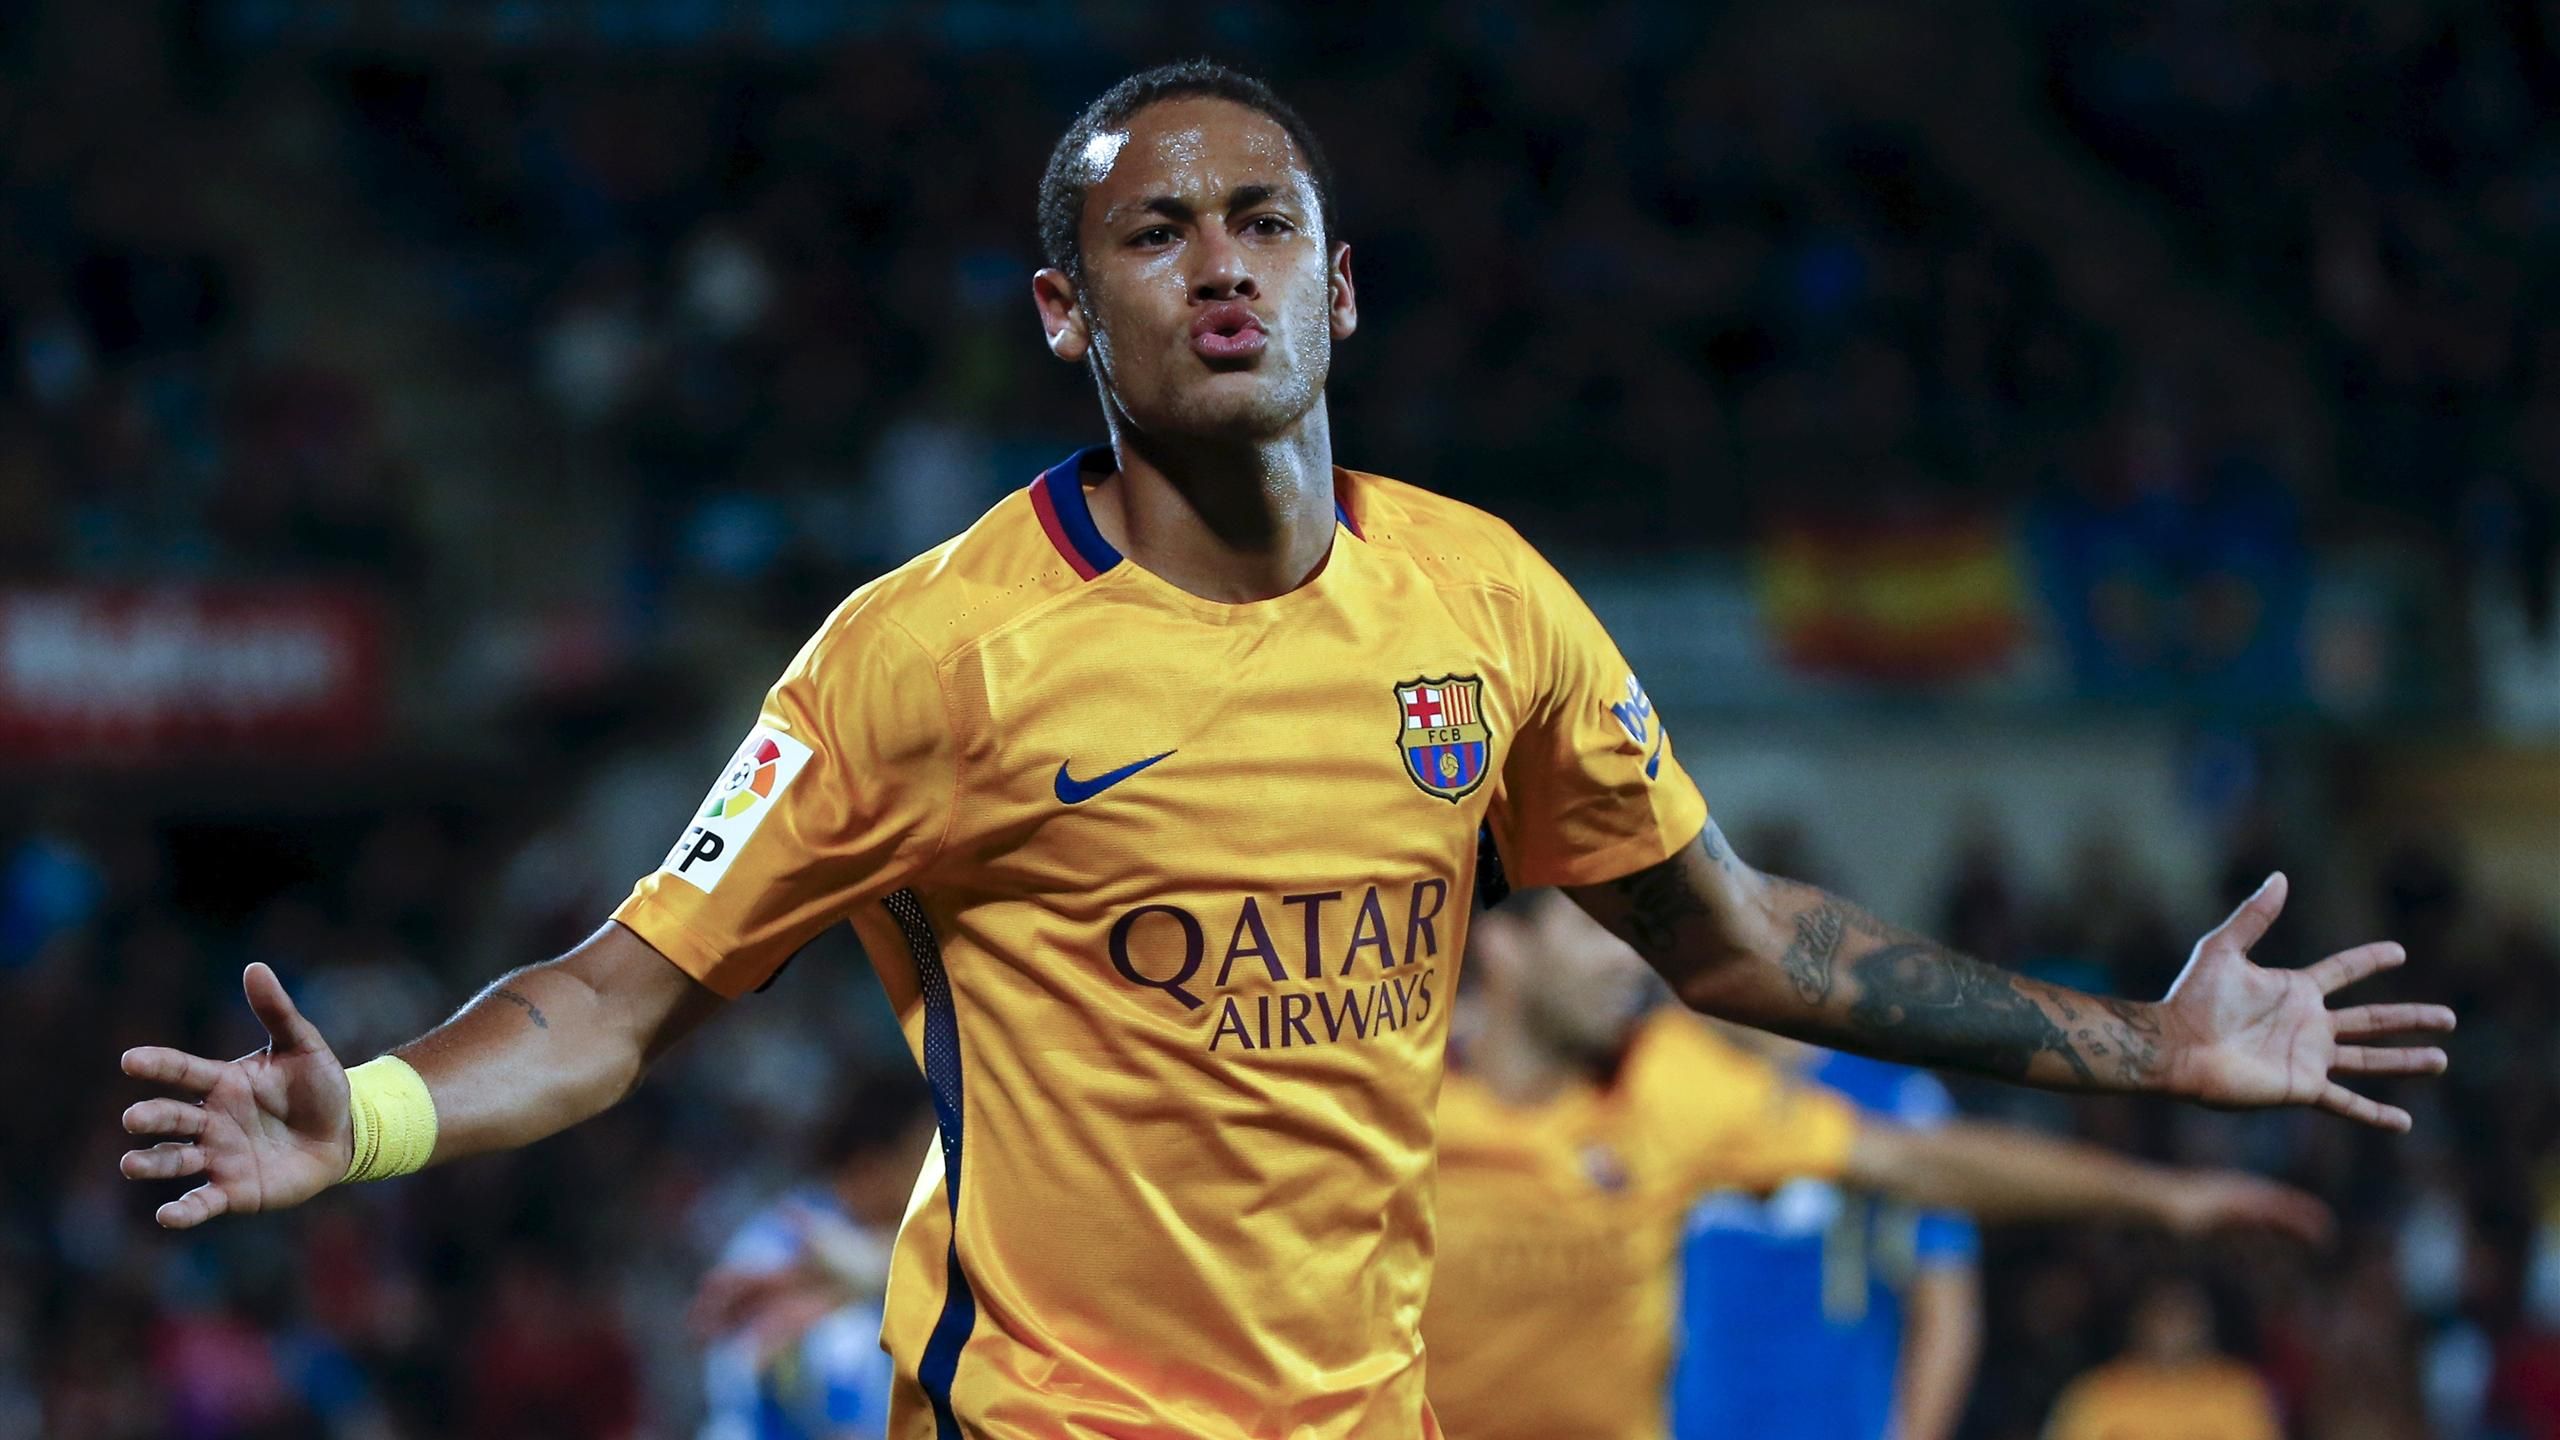 Neymar is 'technically better than Lionel Messi and Cristiano